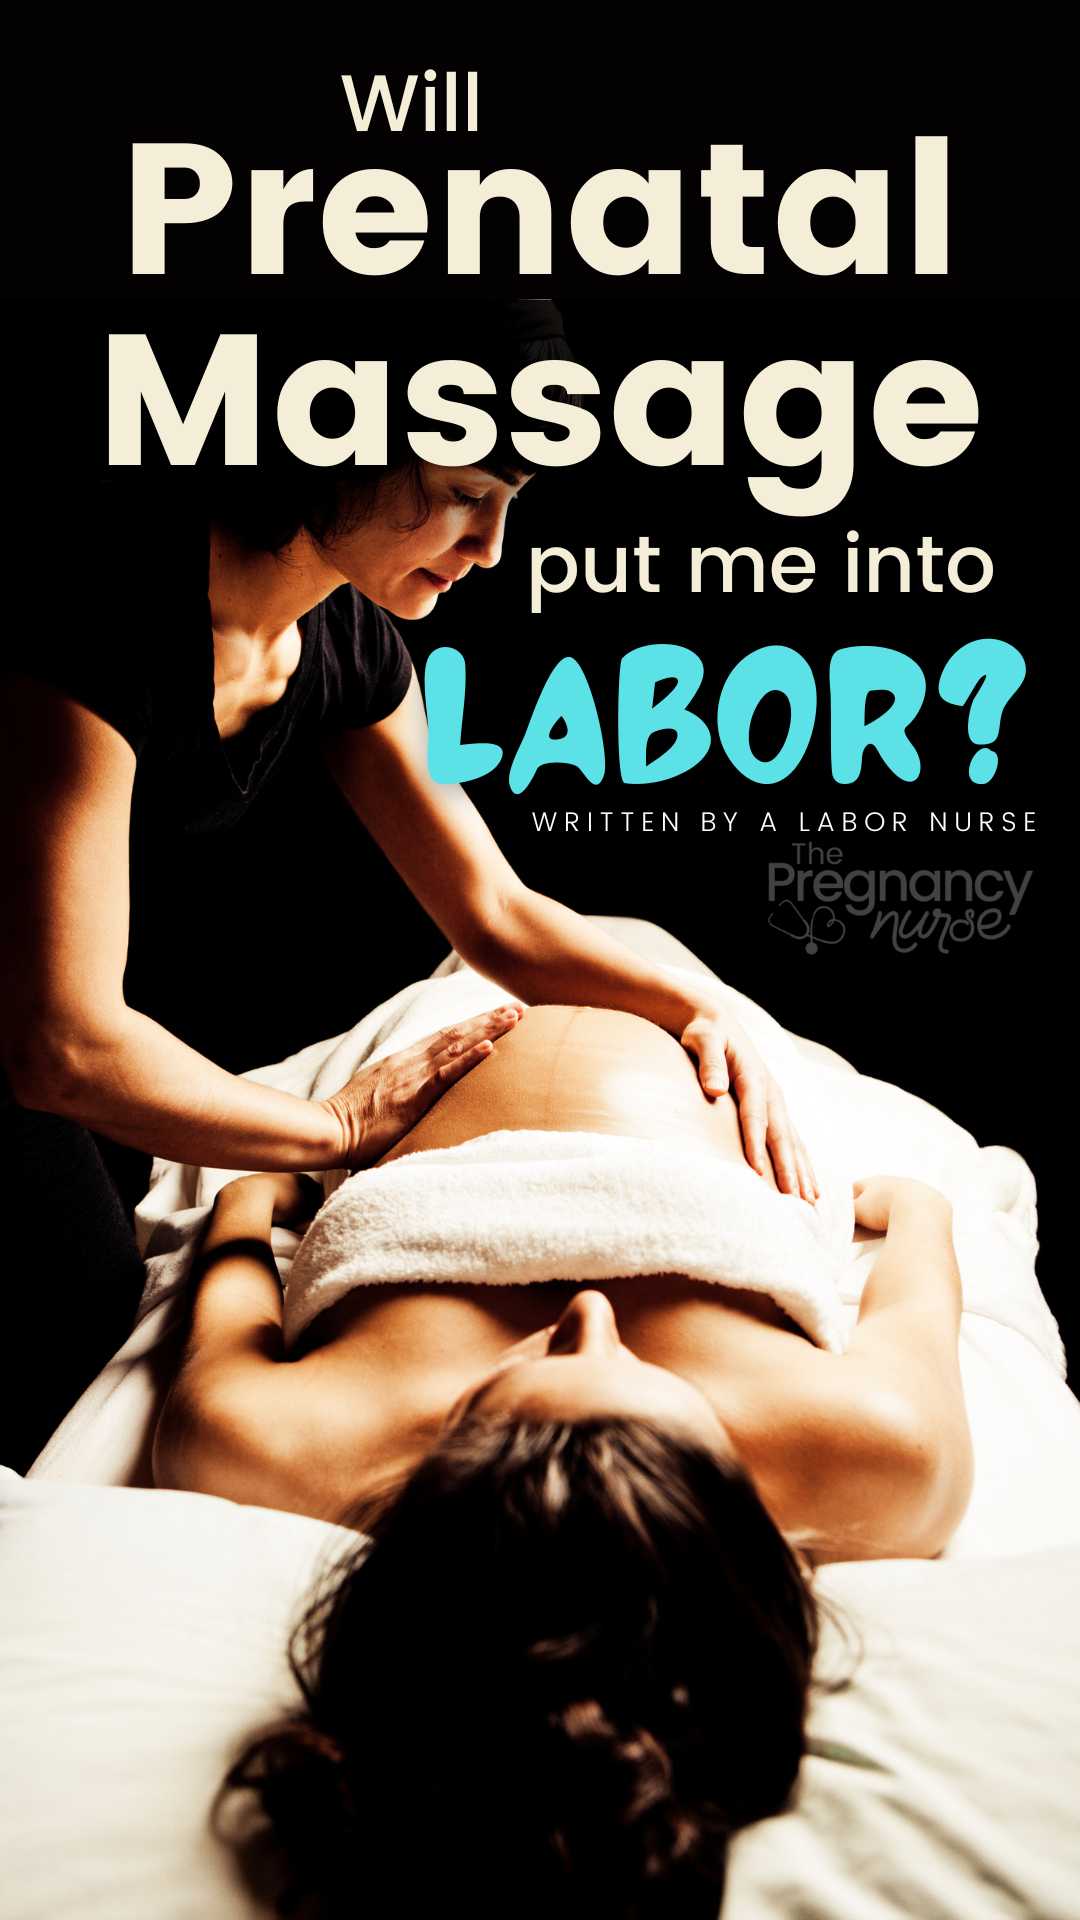 Cam prenatal massage induce labor? If you're hoping for an induction massage close to your due date -- let's find out if acupressure will induce labor naturally?